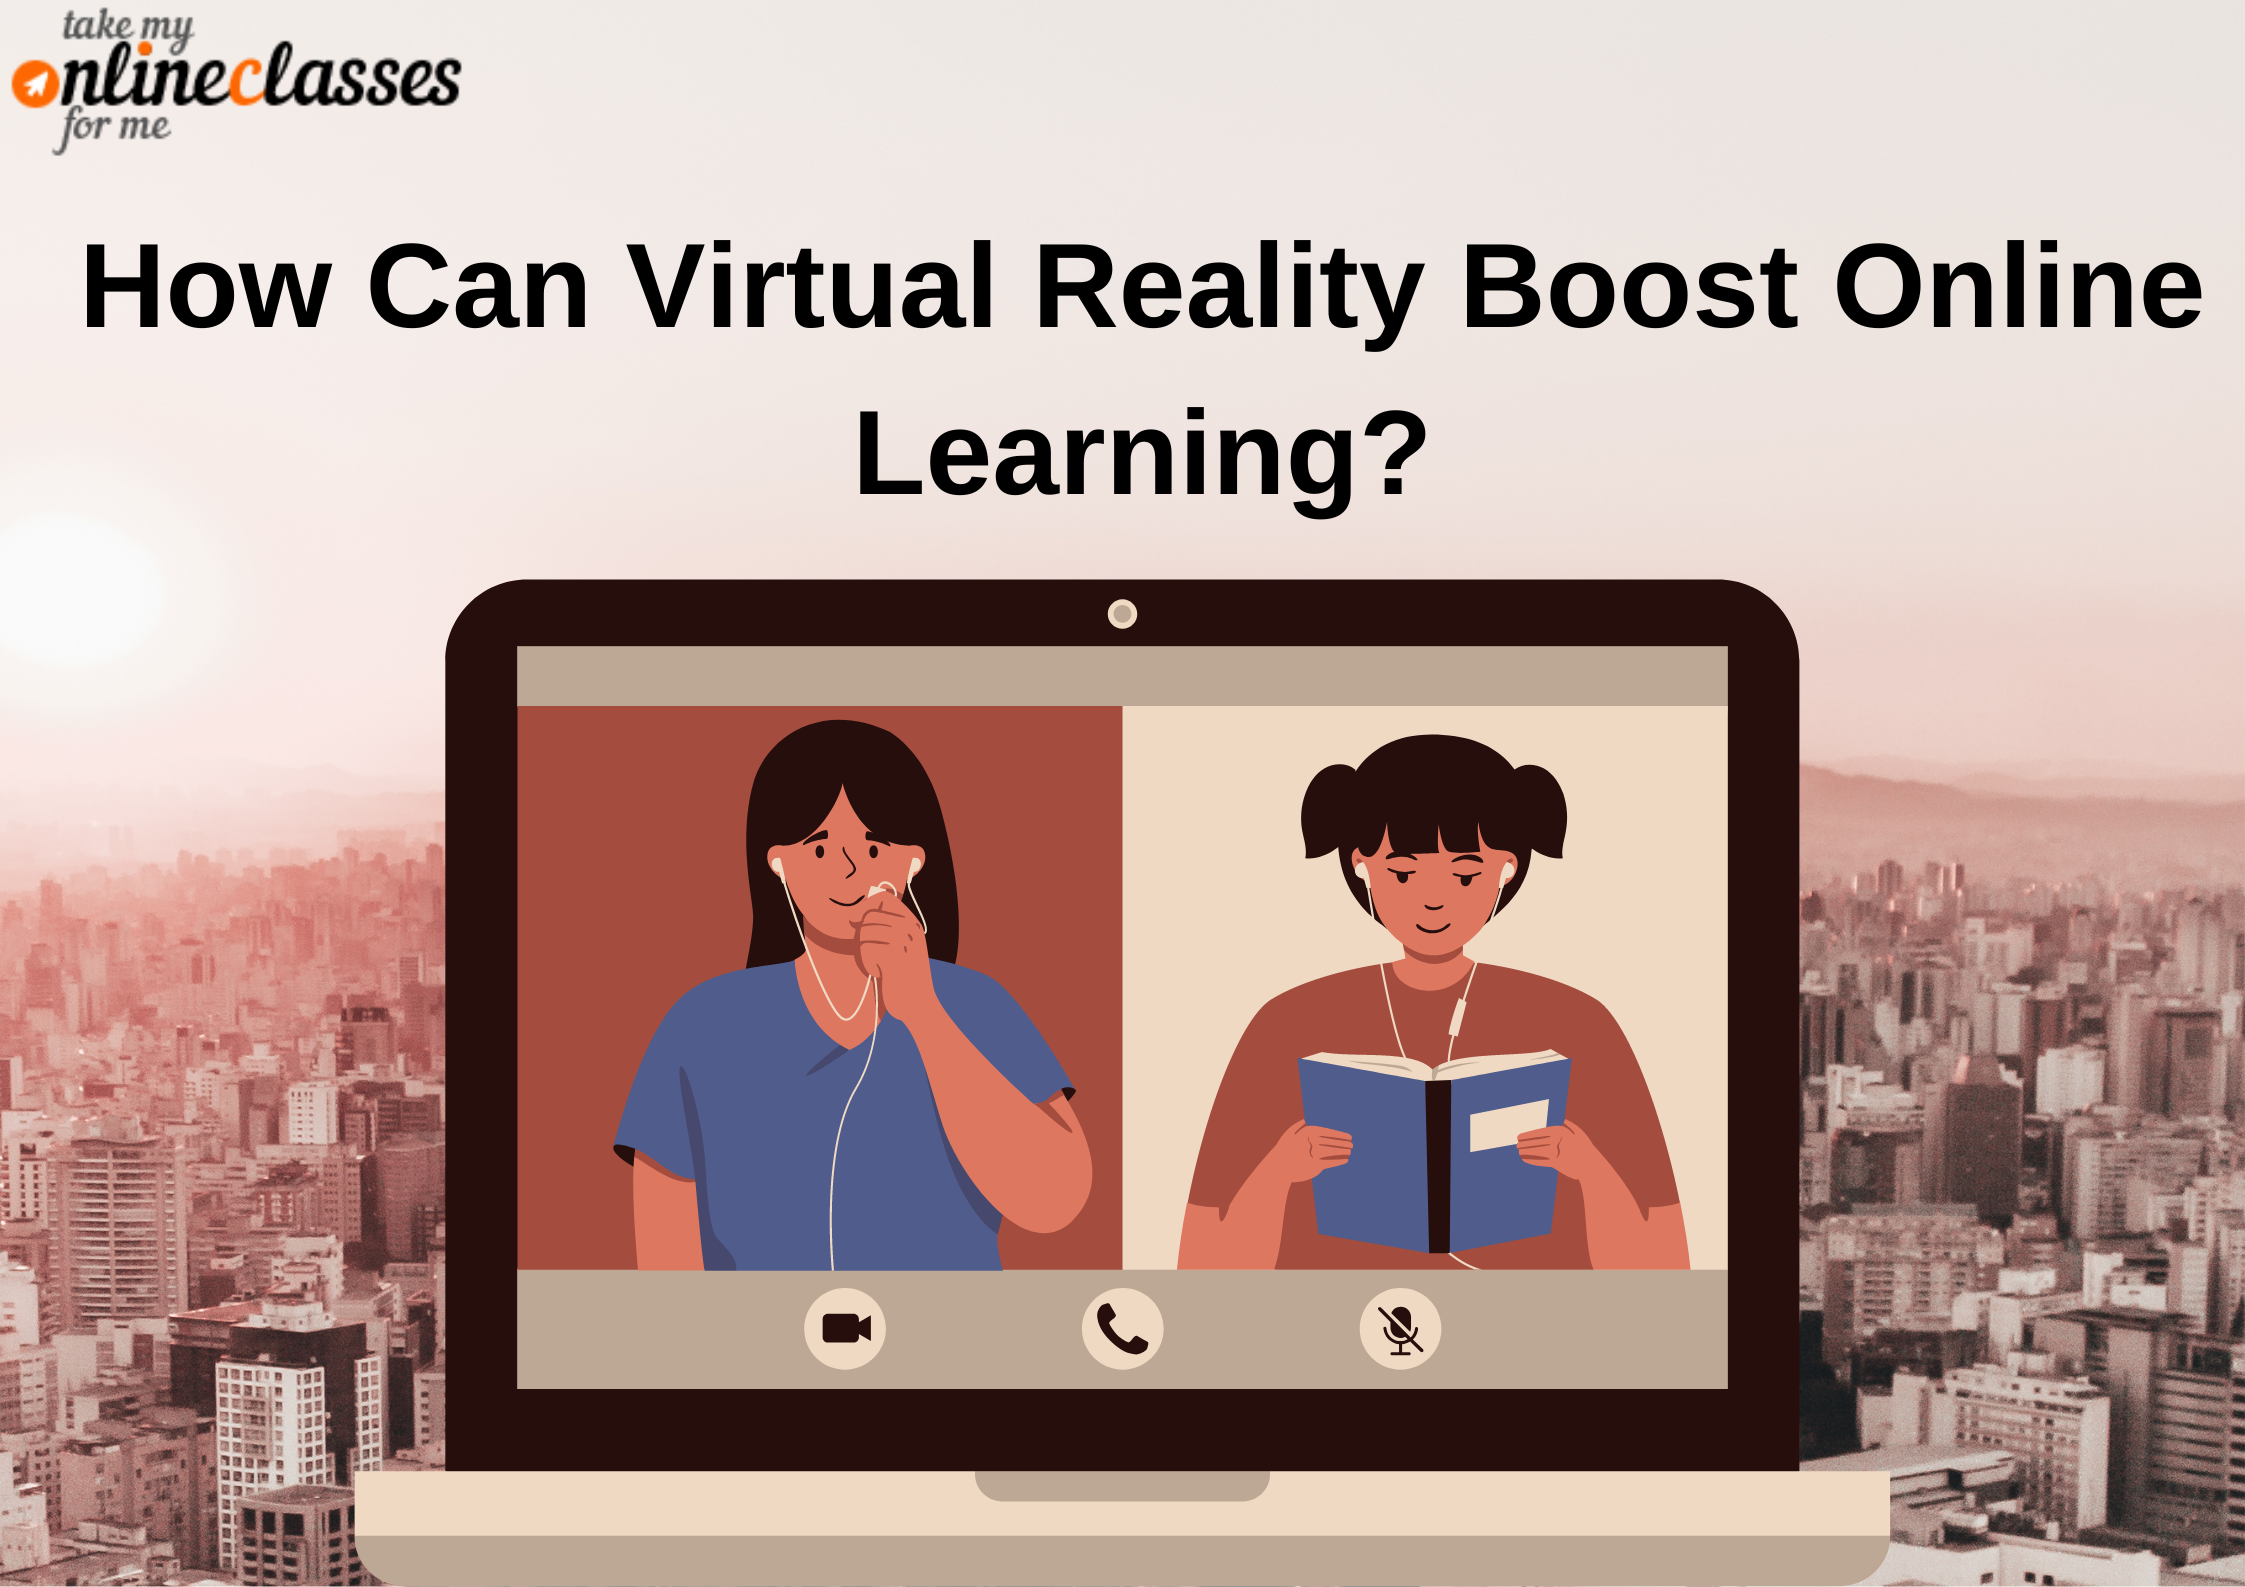 How Can Virtual Reality Boost Online Learning?